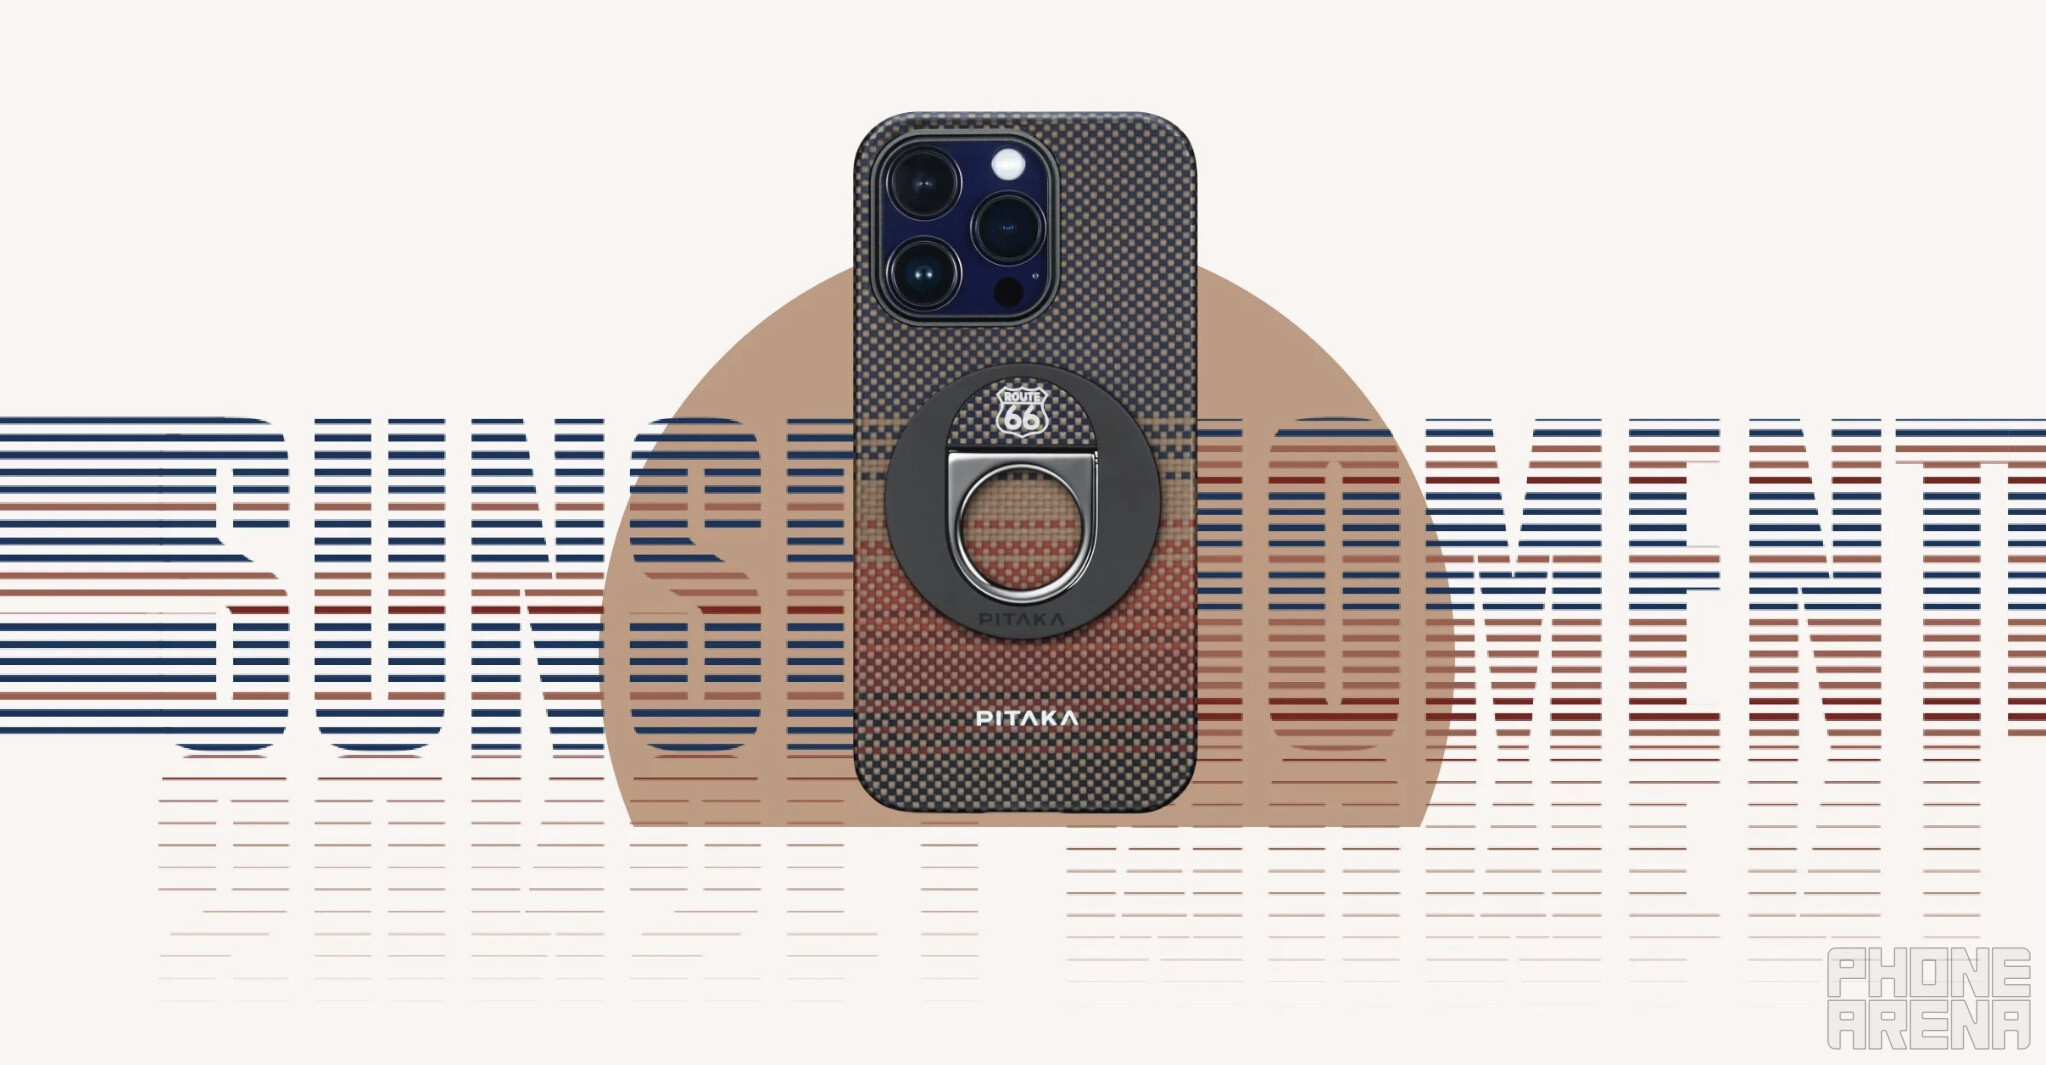 Sold out Sunset Moment case model - Pitaka's new colors: aramid/carbon fiber cases and watch bands with a dash of character!